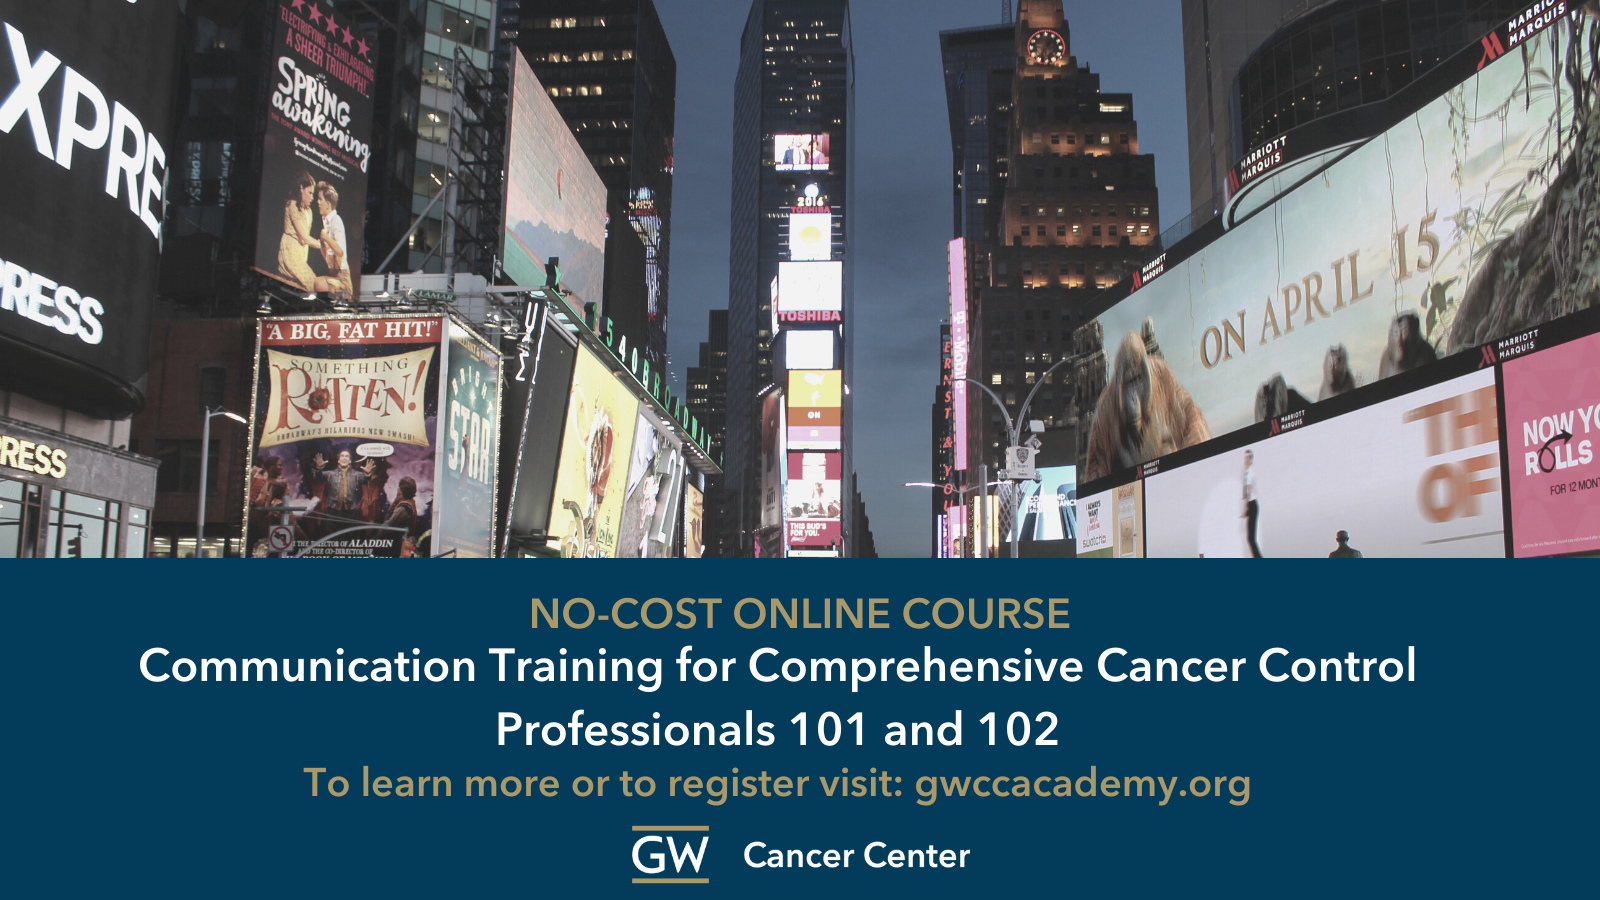 Image of New York City times square with lights and billboards in background. Text below reads "no-cost online course, communication training for Comprehensive Cancer Control Professionals 101 and 102"